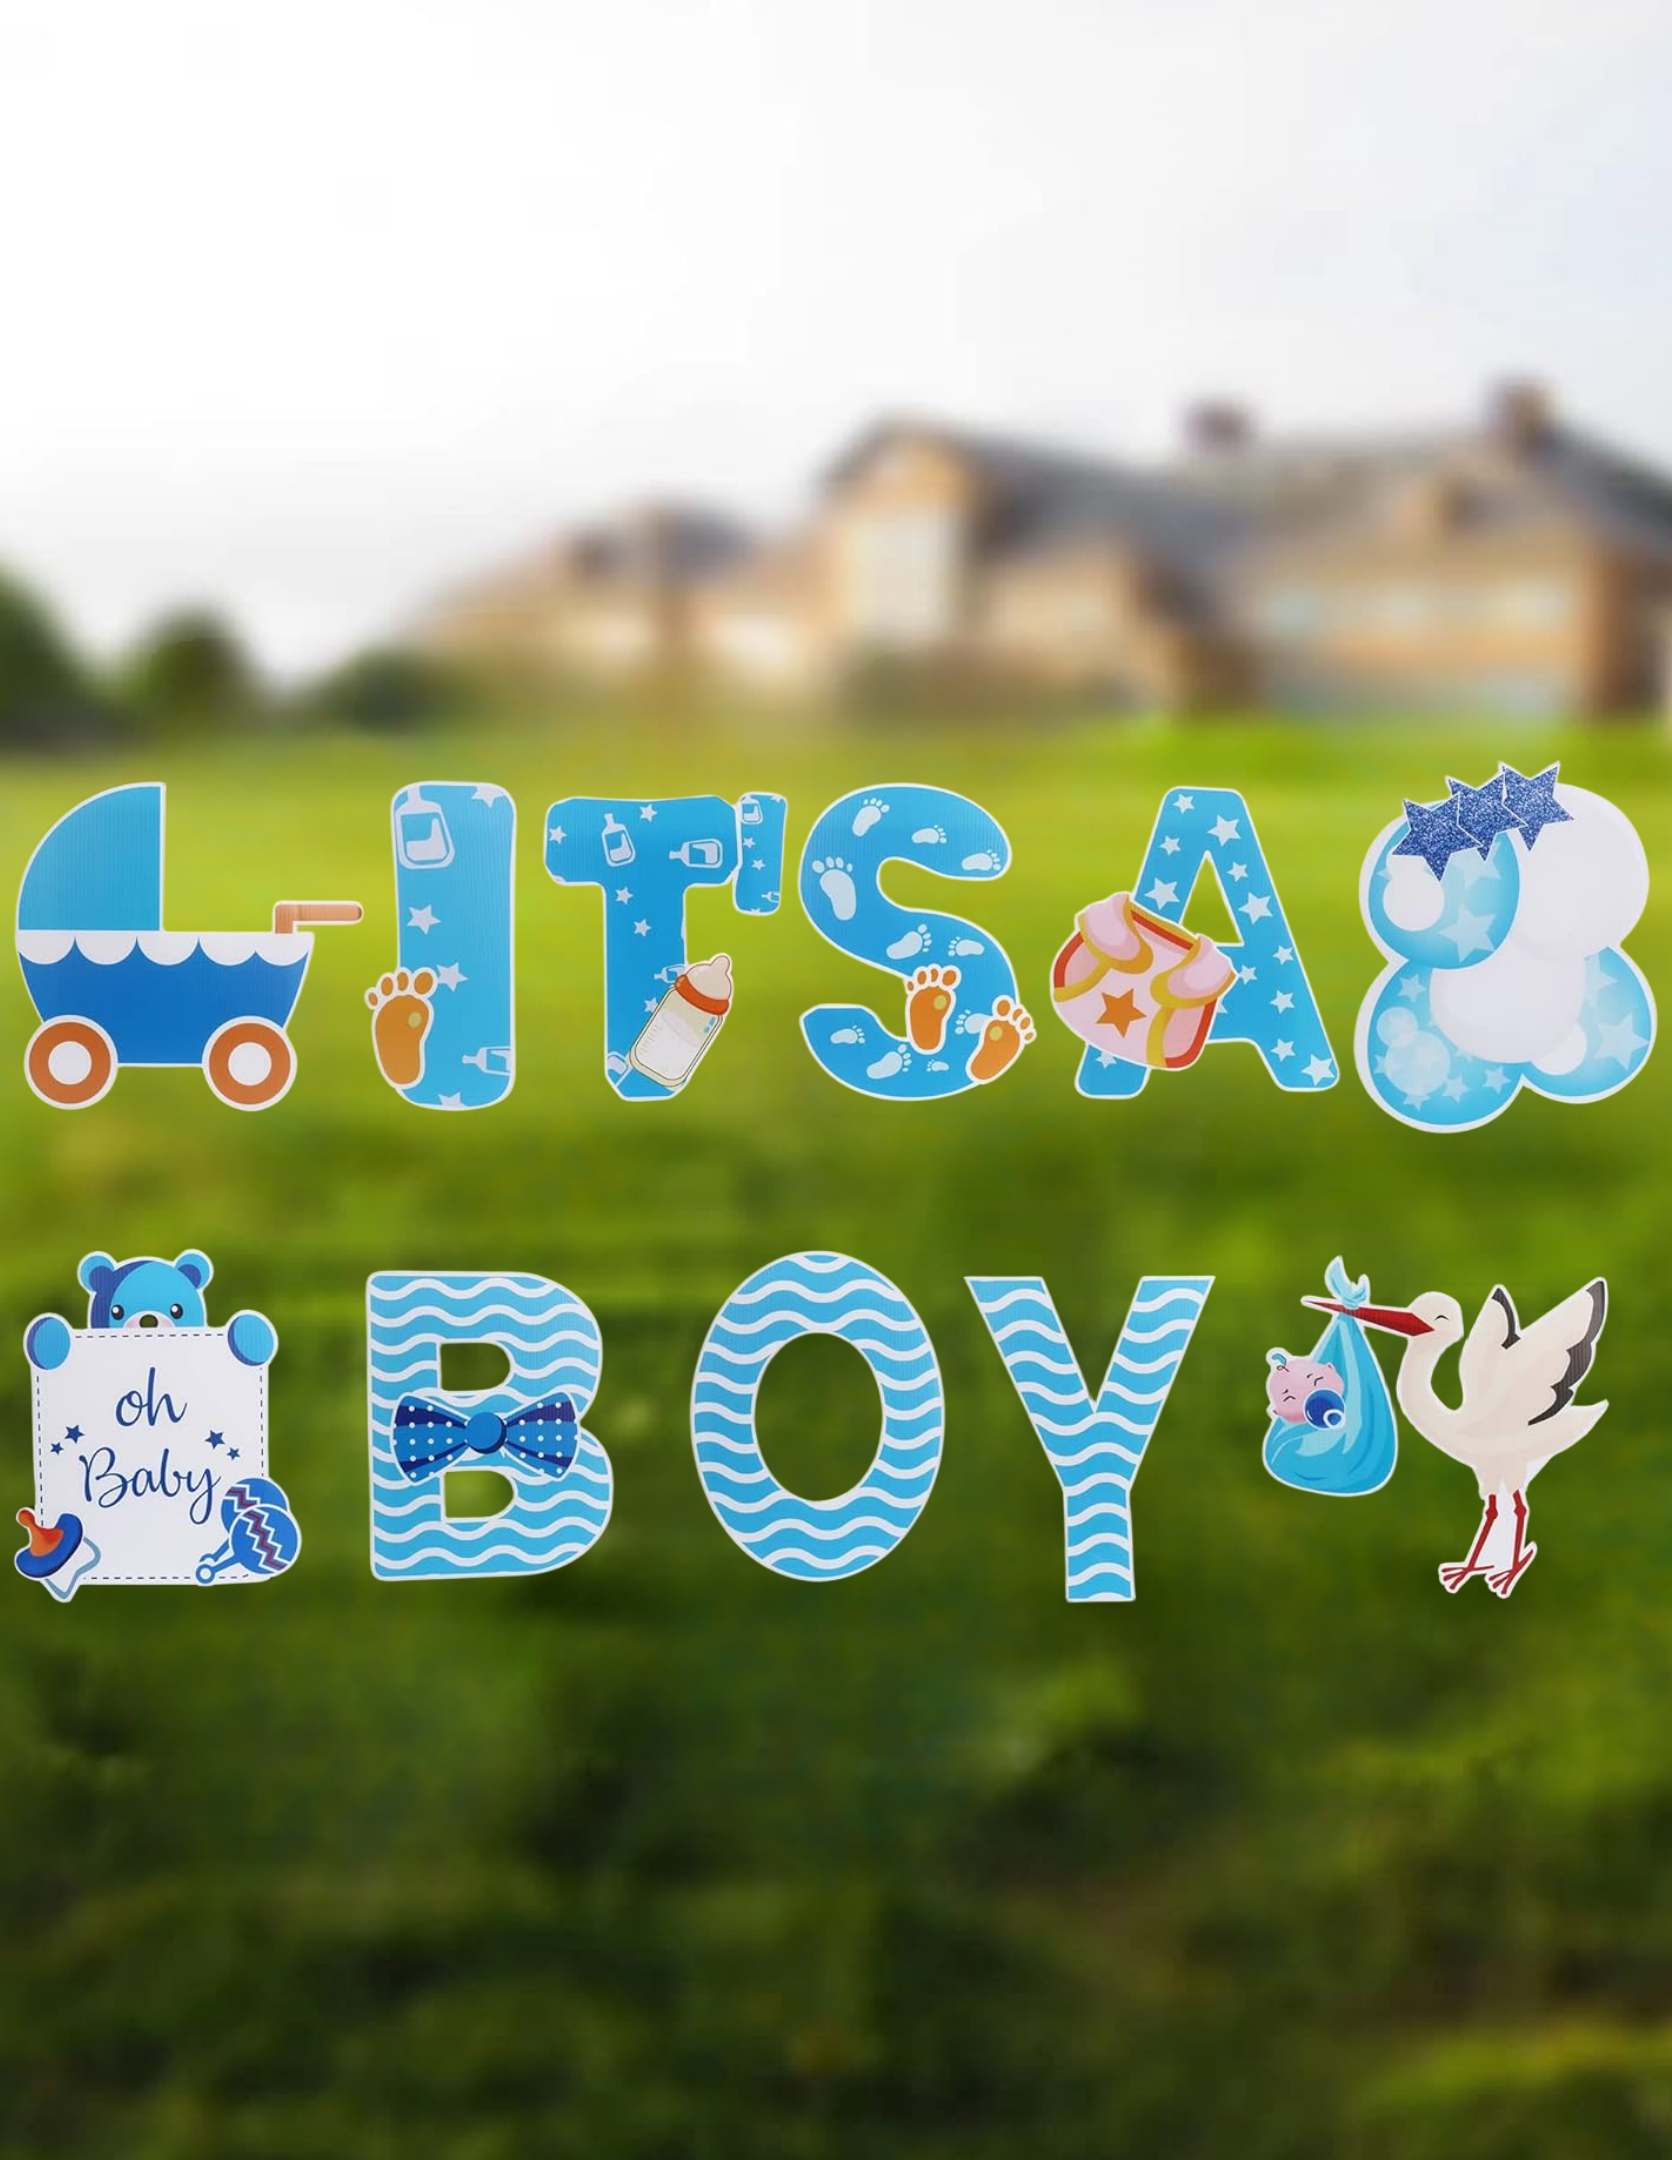 THTEN 11 PACK IT'S A BOY Blue Yard Signs 12 Inch with Stakes,Boy Special Delivery,Boy Stork Baby Shower,Gender Reveal Outdoor Welcome Home Newborn Announcement Sign for Party Decorations